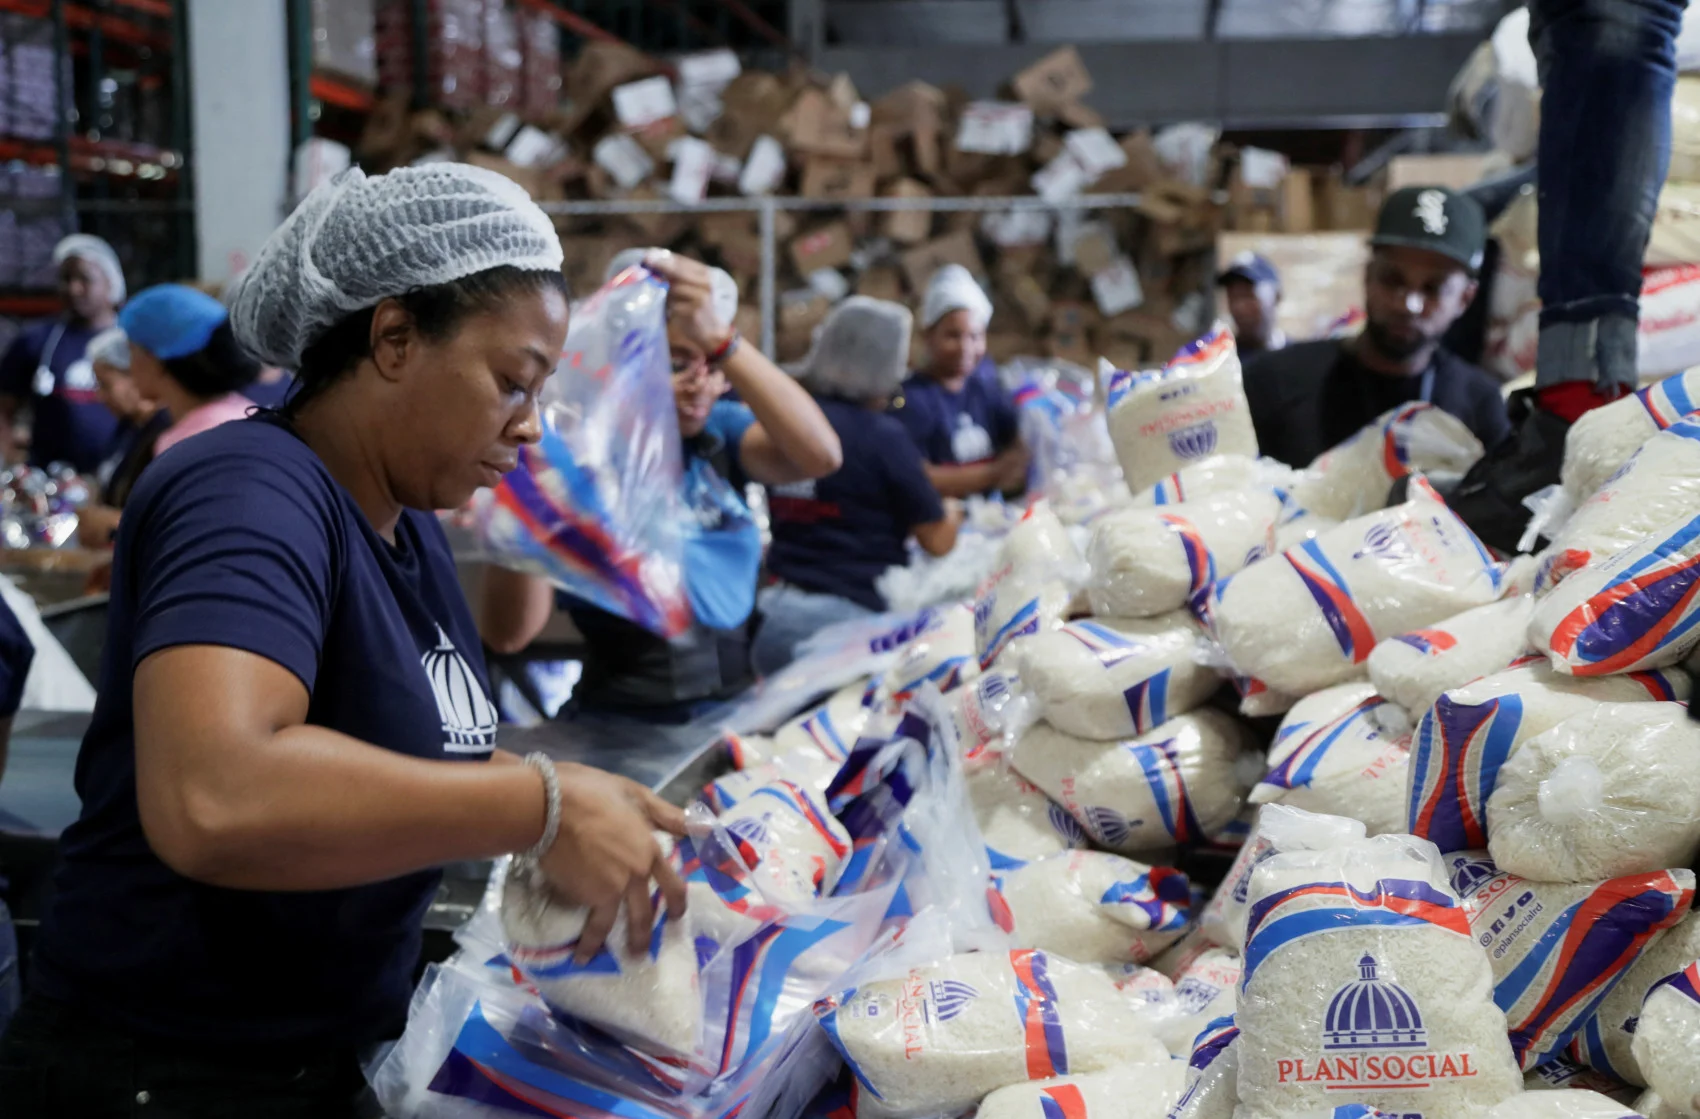 Workers of the Social State Plan prepare food rations in preparation for Hurricane Fiona, in Santo Domingo, Dominican Republic, September 18, 2022. (REUTERS/Ricardo Rojas)